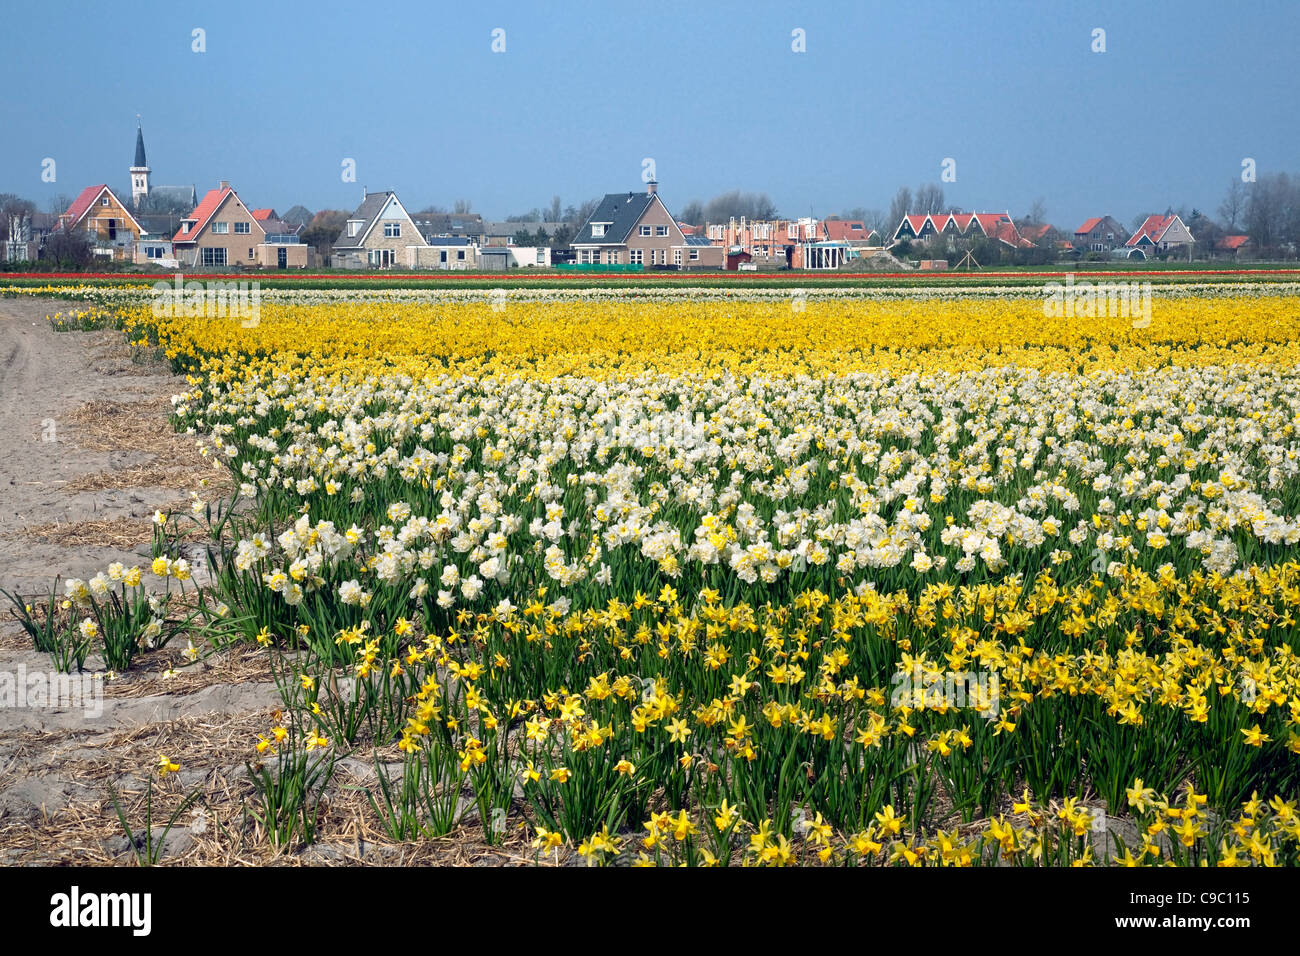 Colourful narcissus and daffodil field (Narcissus sp.) near the village of Den Hoorn, Texel, the Netherlands Stock Photo